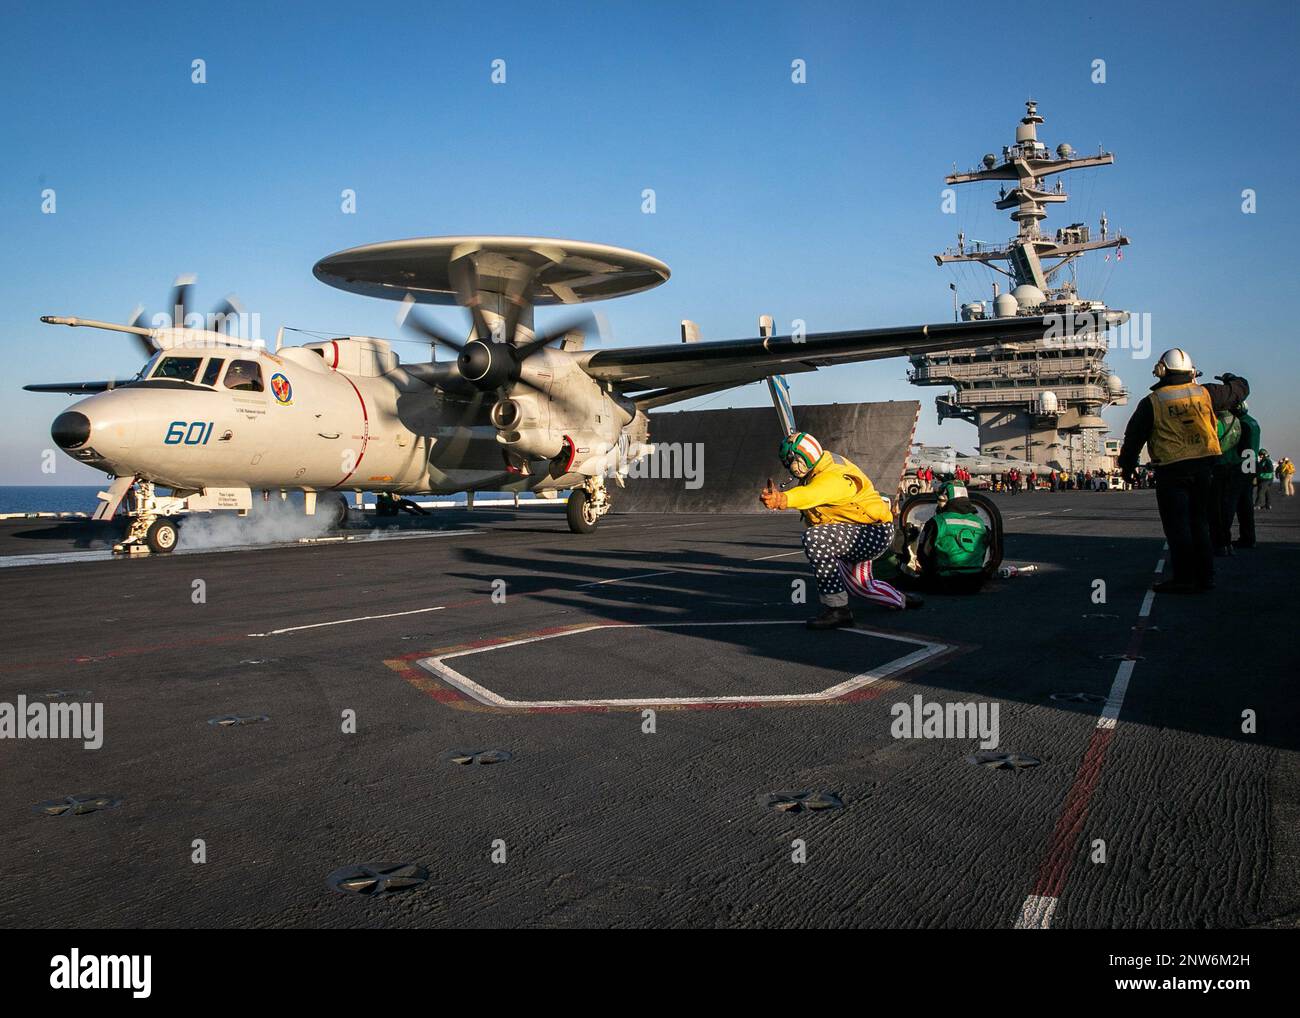 230220-N-EL850-4025 ADRIATIC SEA (Feb. 20, 2023) Lt. Cmdr. Christopher Baker, assigned to the Nimitz-class aircraft carrier USS George H.W. Bush (CVN 77), launches an E-2D Hawkeye, attached to Carrier Airborne Early Warning Squadron (VAW) 121, off of the flight deck during flight operations, Feb. 20, 2023. Carrier Air Wing (CVW) 7 is the offensive air and strike component of Carrier Strike Group (CSG) 10 and the George H.W. Bush CSG. The squadrons of CVW-7 are Strike Fighter Squadron (VFA) 143, VFA-103, VFA-86, VFA-136, Carrier Airborne Early Warning Squadron (VAW) 121, Electronic Attack Squad Stock Photo